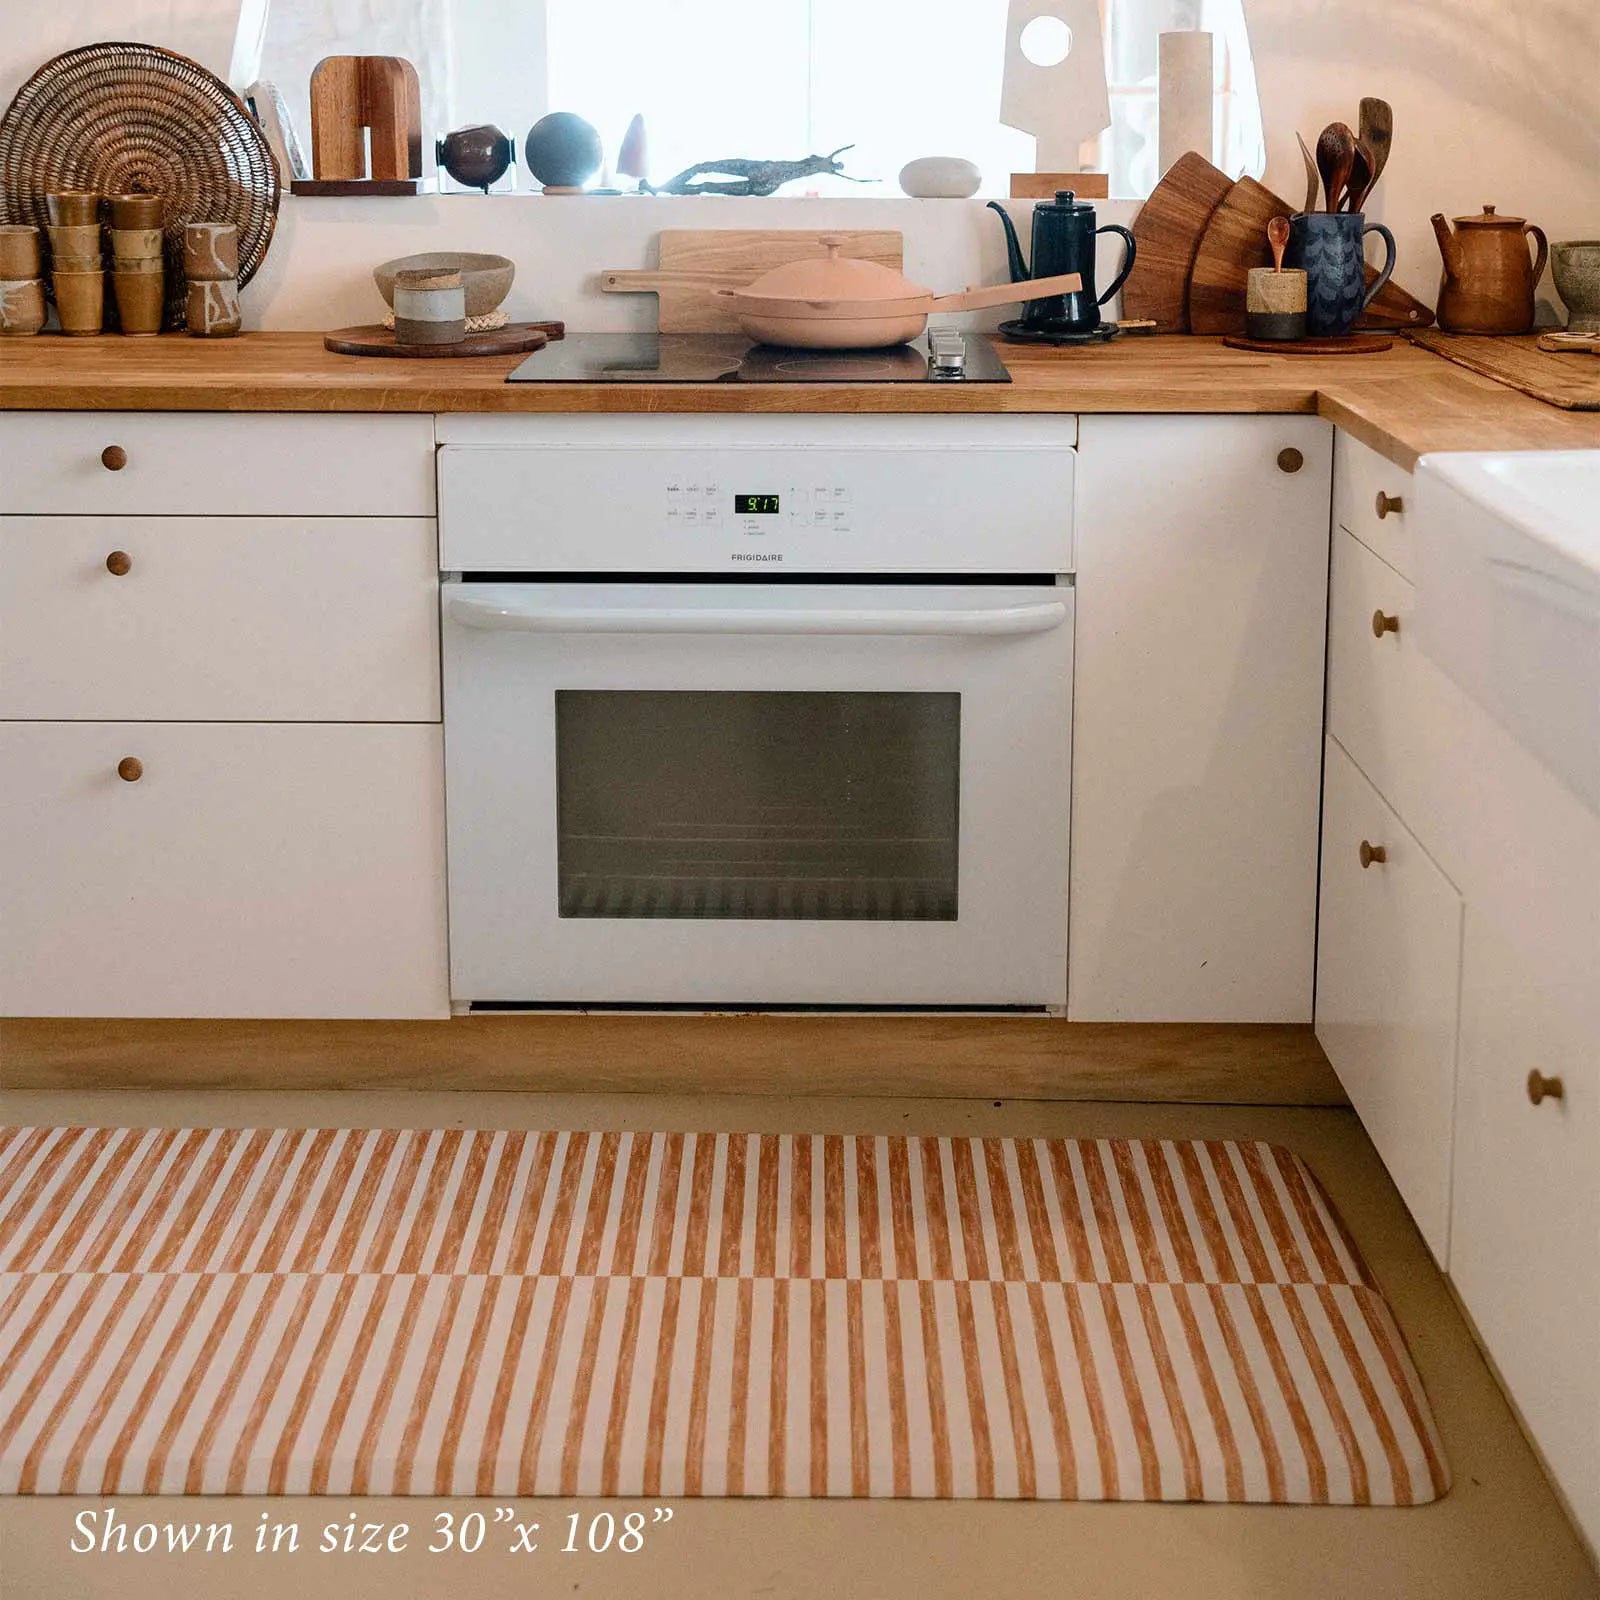 Reese terracotta brown and white inverted stripe standing mat shown in kitchen in size 30x108